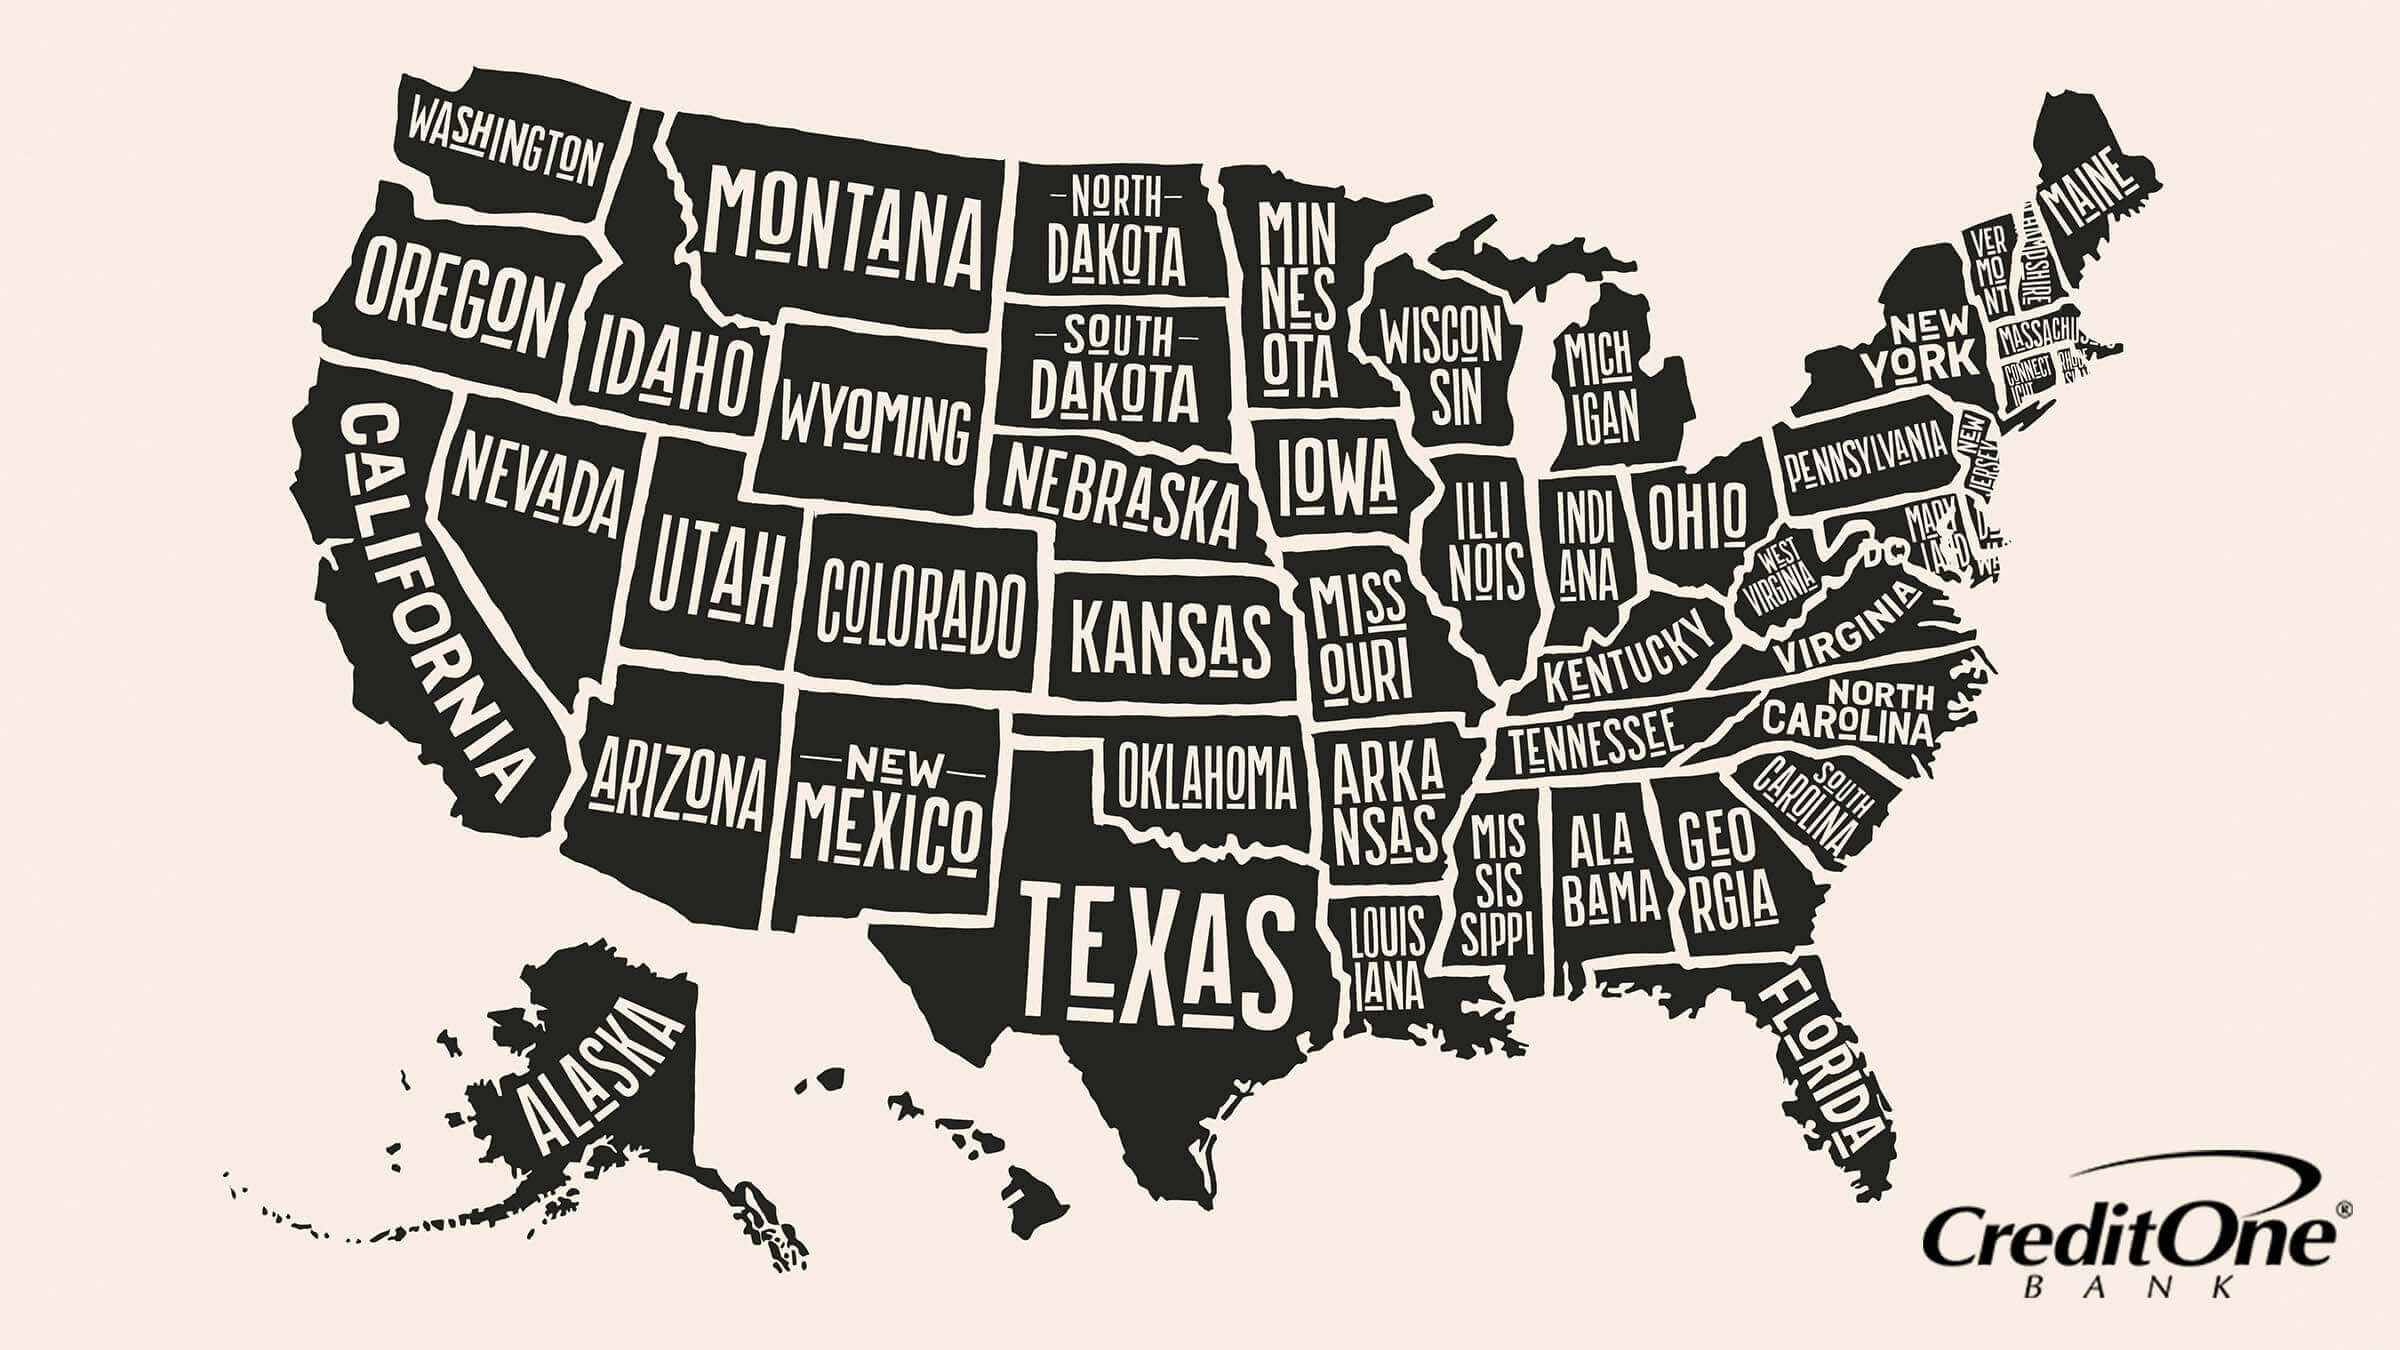 A drawn map of the United States with each state labeled.